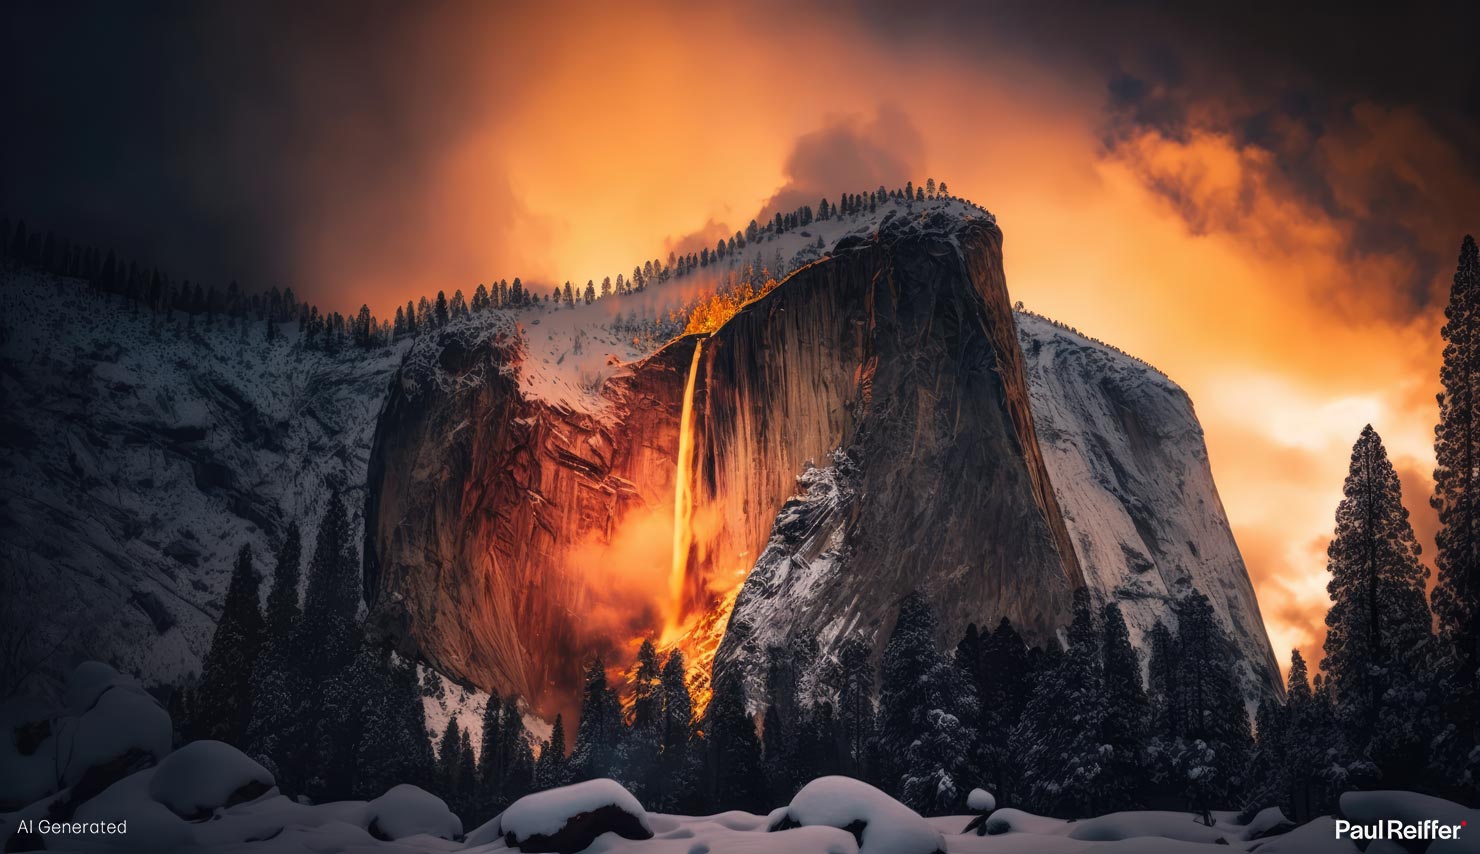 Firefall Yosemite Fantasy Examples Options Sunset Fire Fall Midjourney Imagine Split Photographers Landscape How To Use AI Images Good Bad Review Bing ChatGPT Guide Paul Reiffer